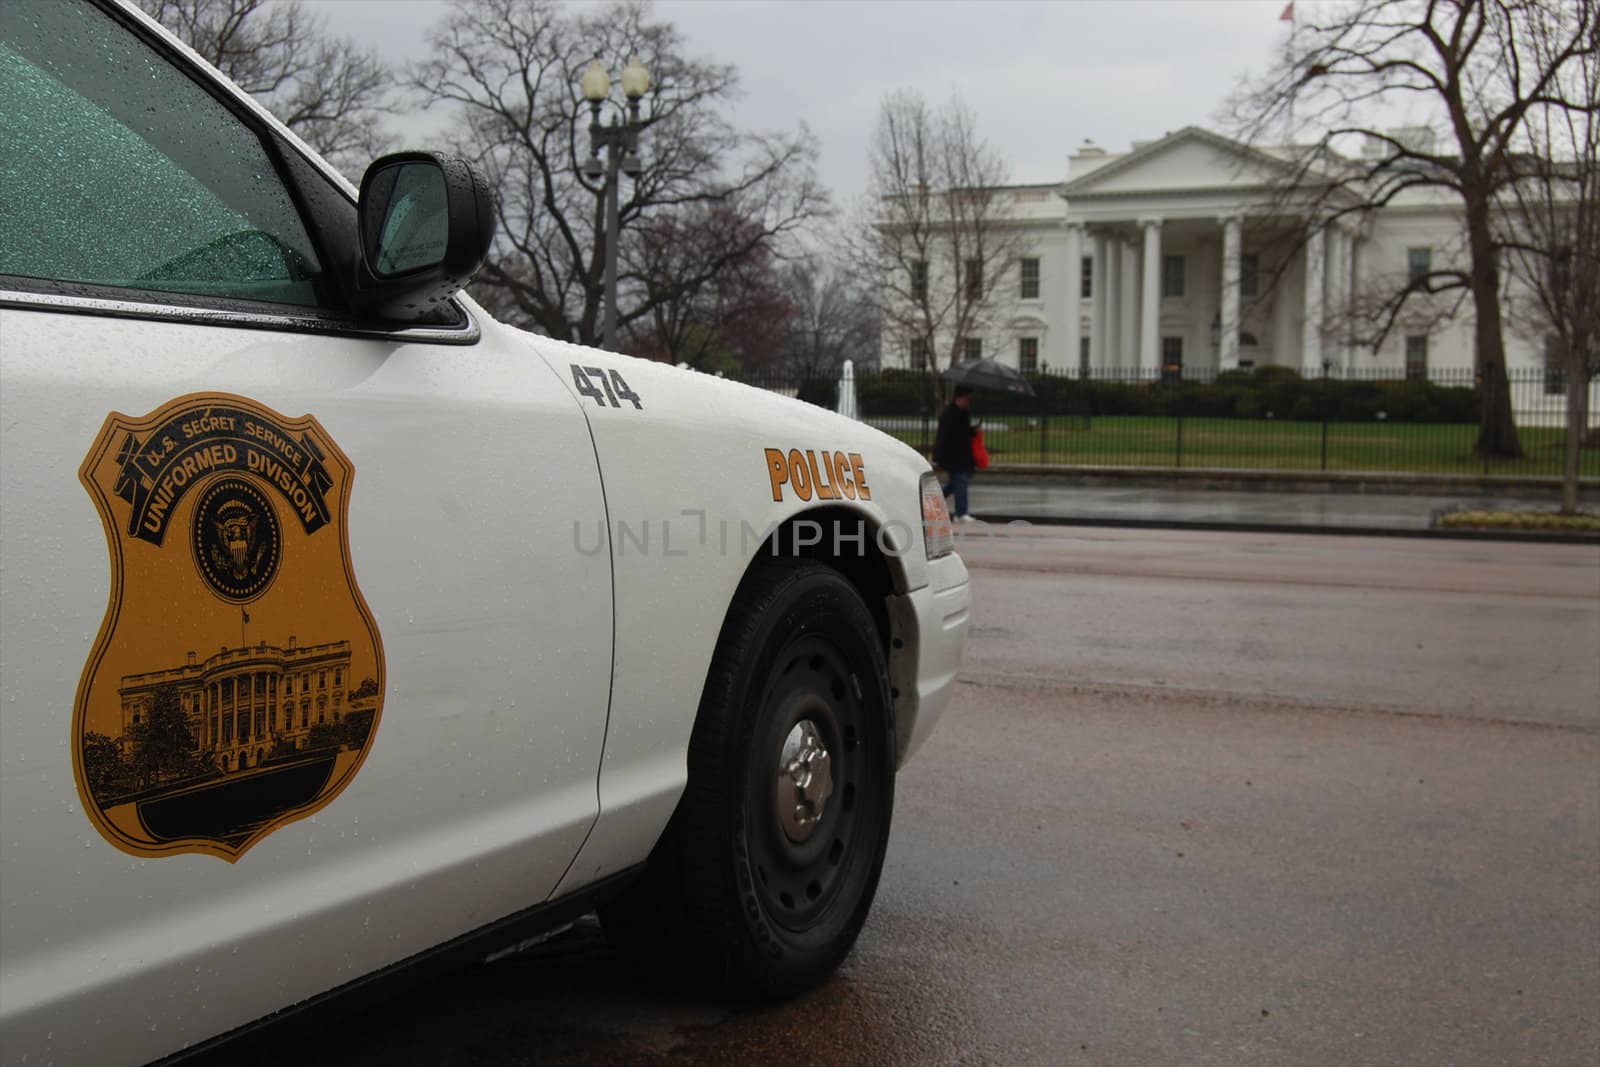 Secret Service car and White House by tyroneburkemedia@gmail.com